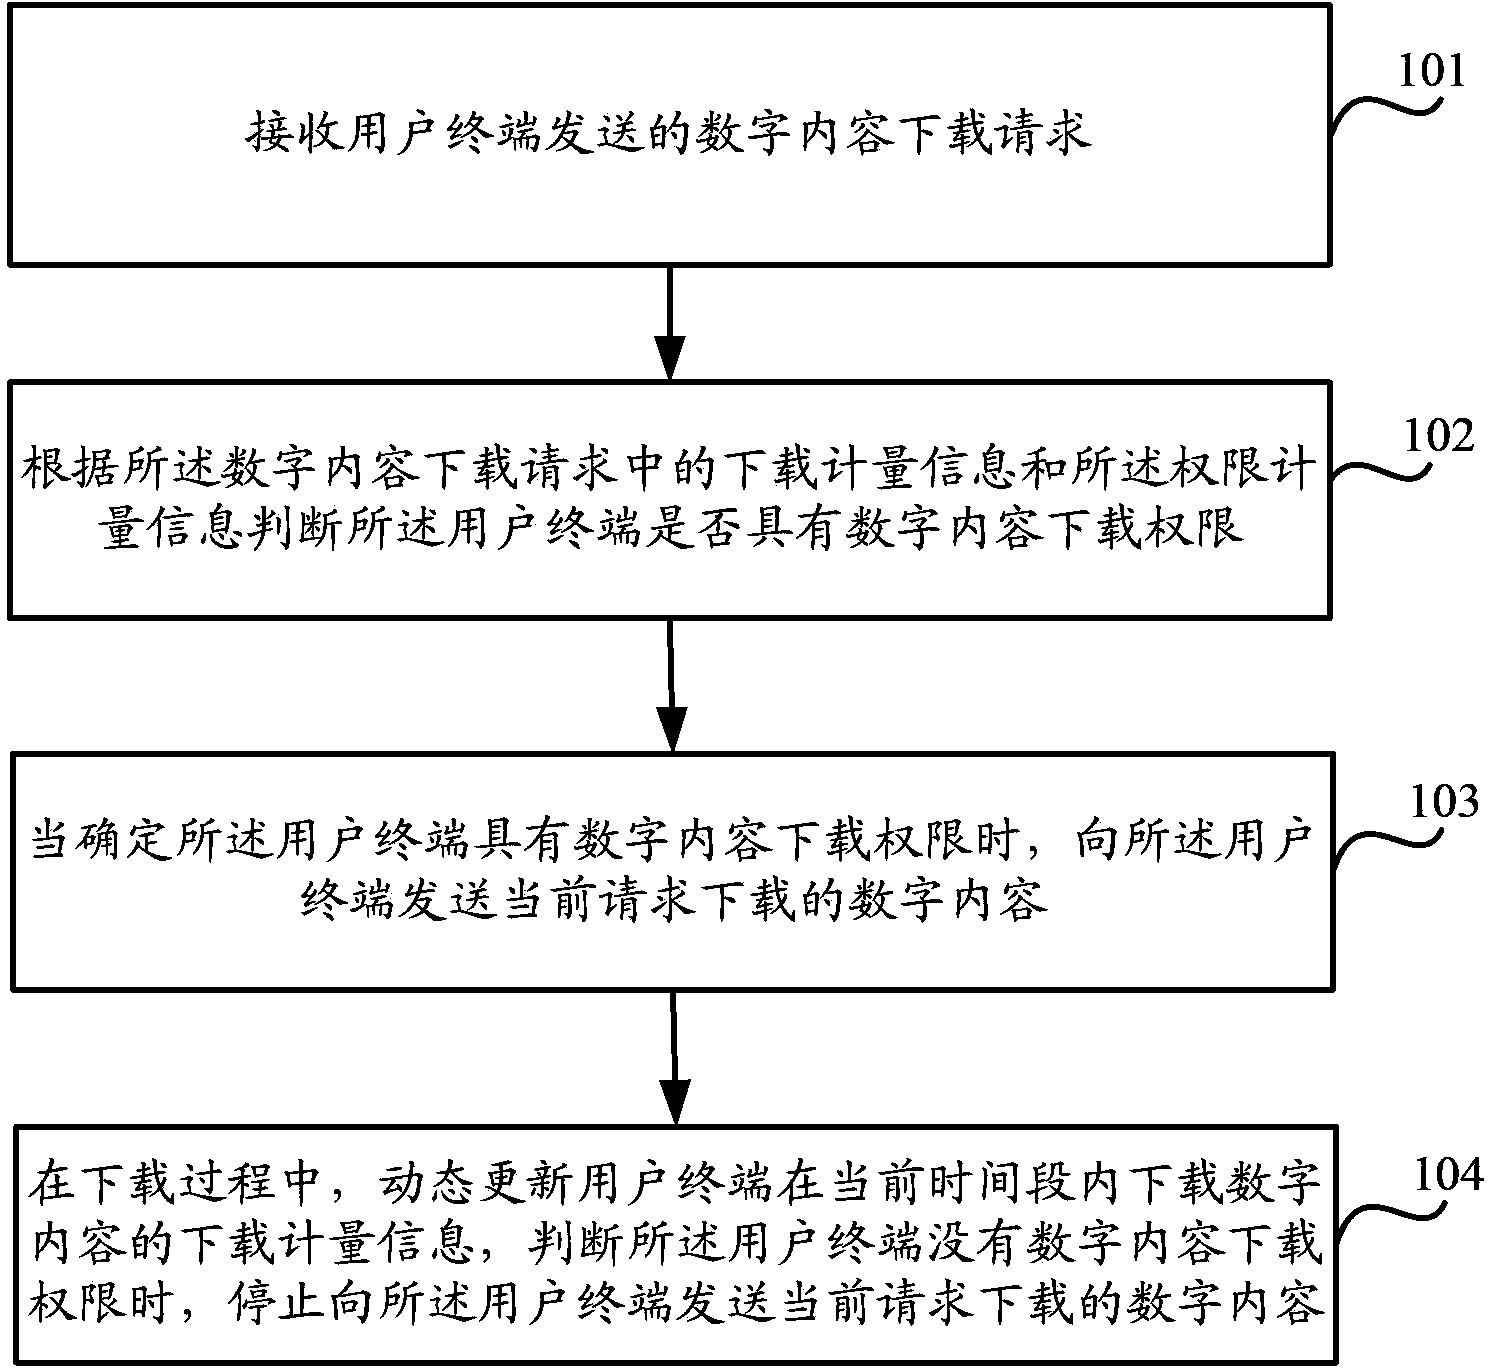 Method and apparatus for monitoring downloading of digital content, and method and apparatus for downloading digital content